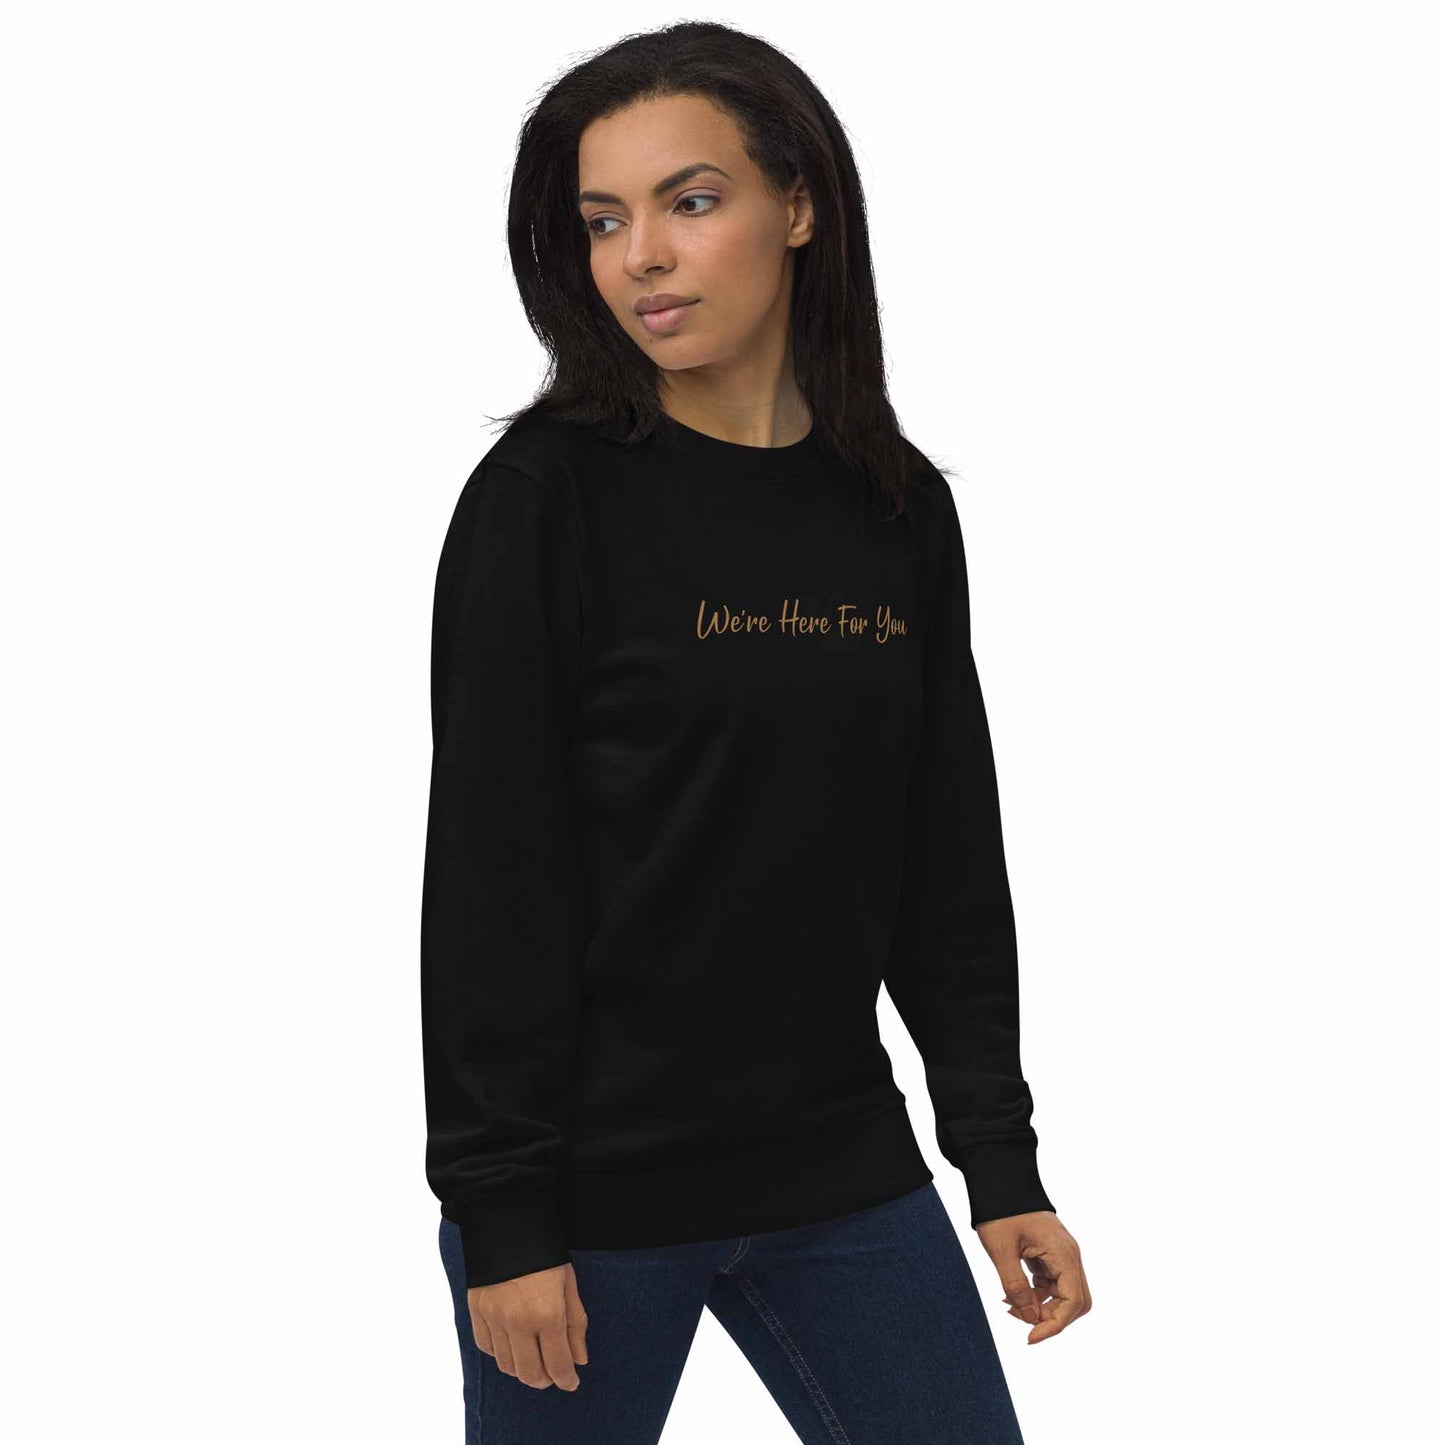 Women black positive sweatshirt with inspirational quote, "We Are Here For You."